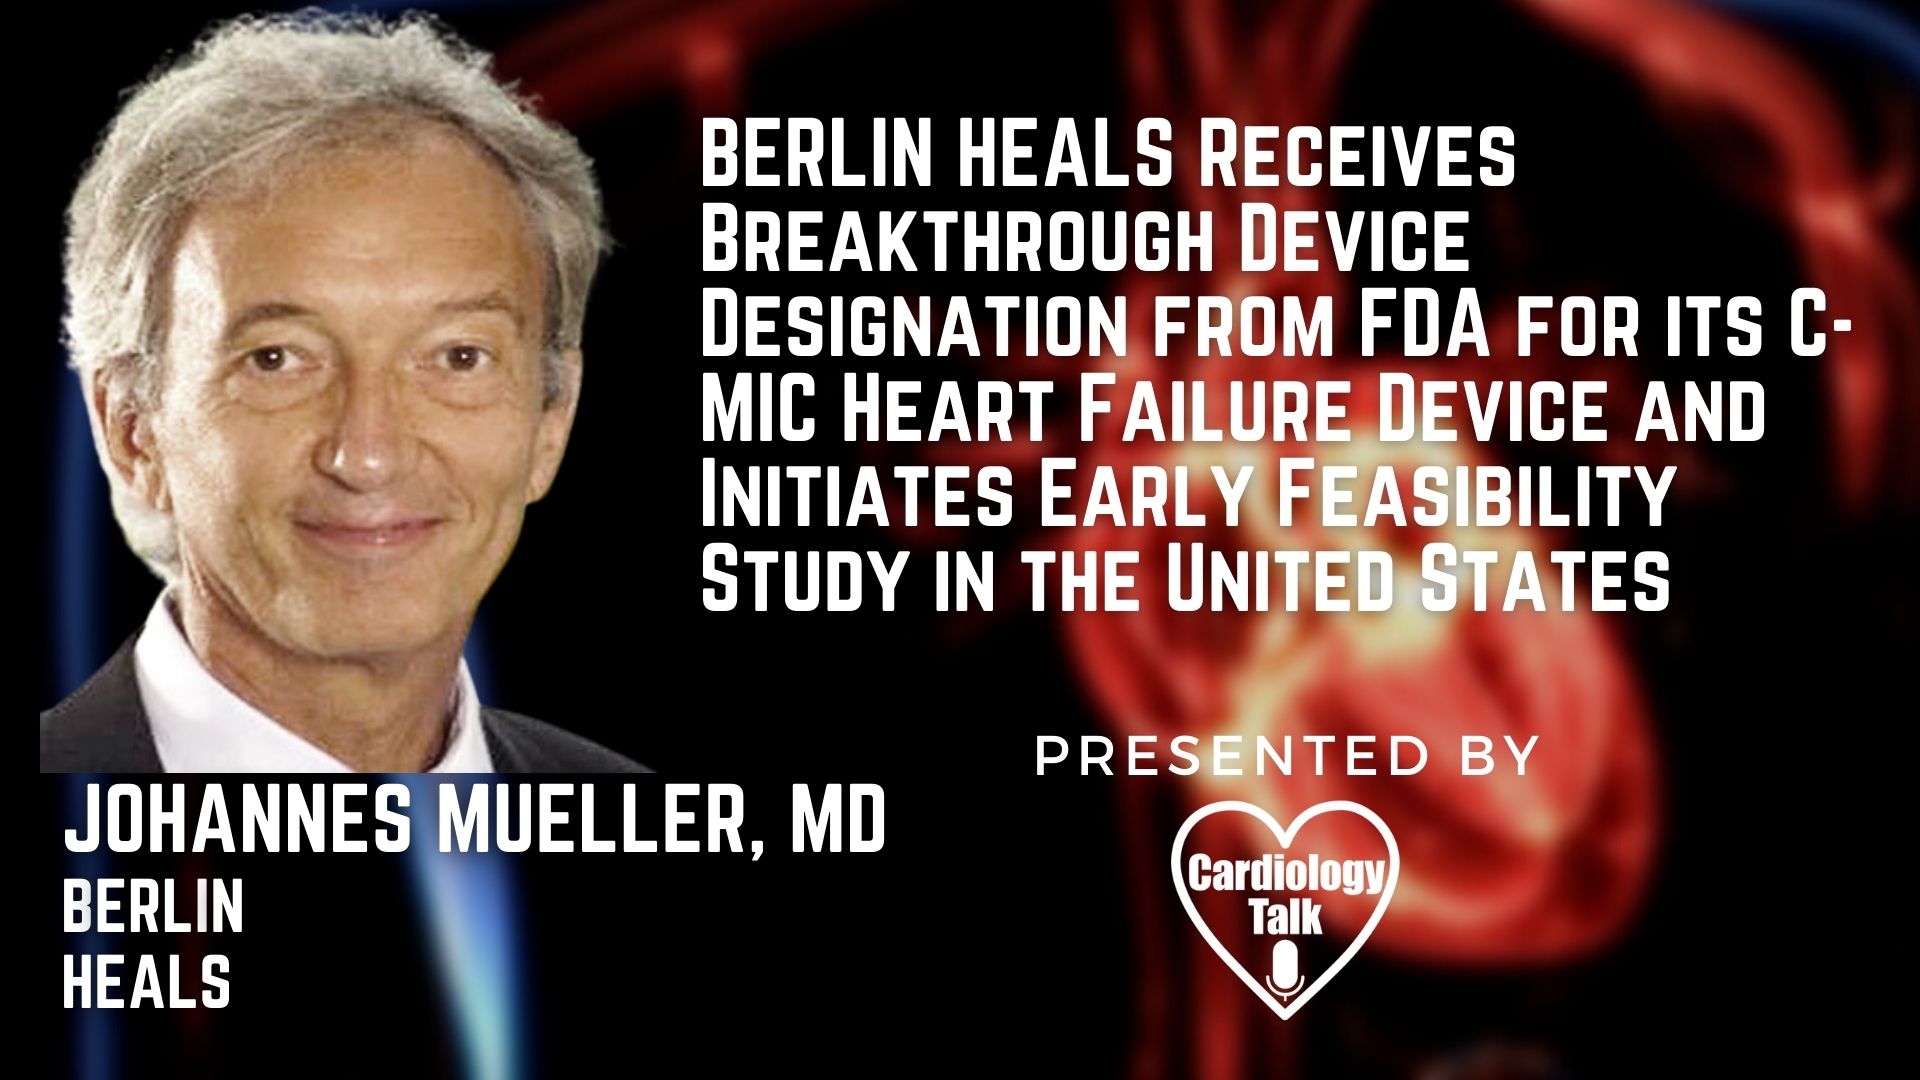 Johannes Muller, MD @BerlinHeals #HeartFailure #Cardiology #Heart #Research BERLIN HEALS Receives Breakthrough Device Designation from FDA for its C-MIC Heart Failure Device and Initiates...